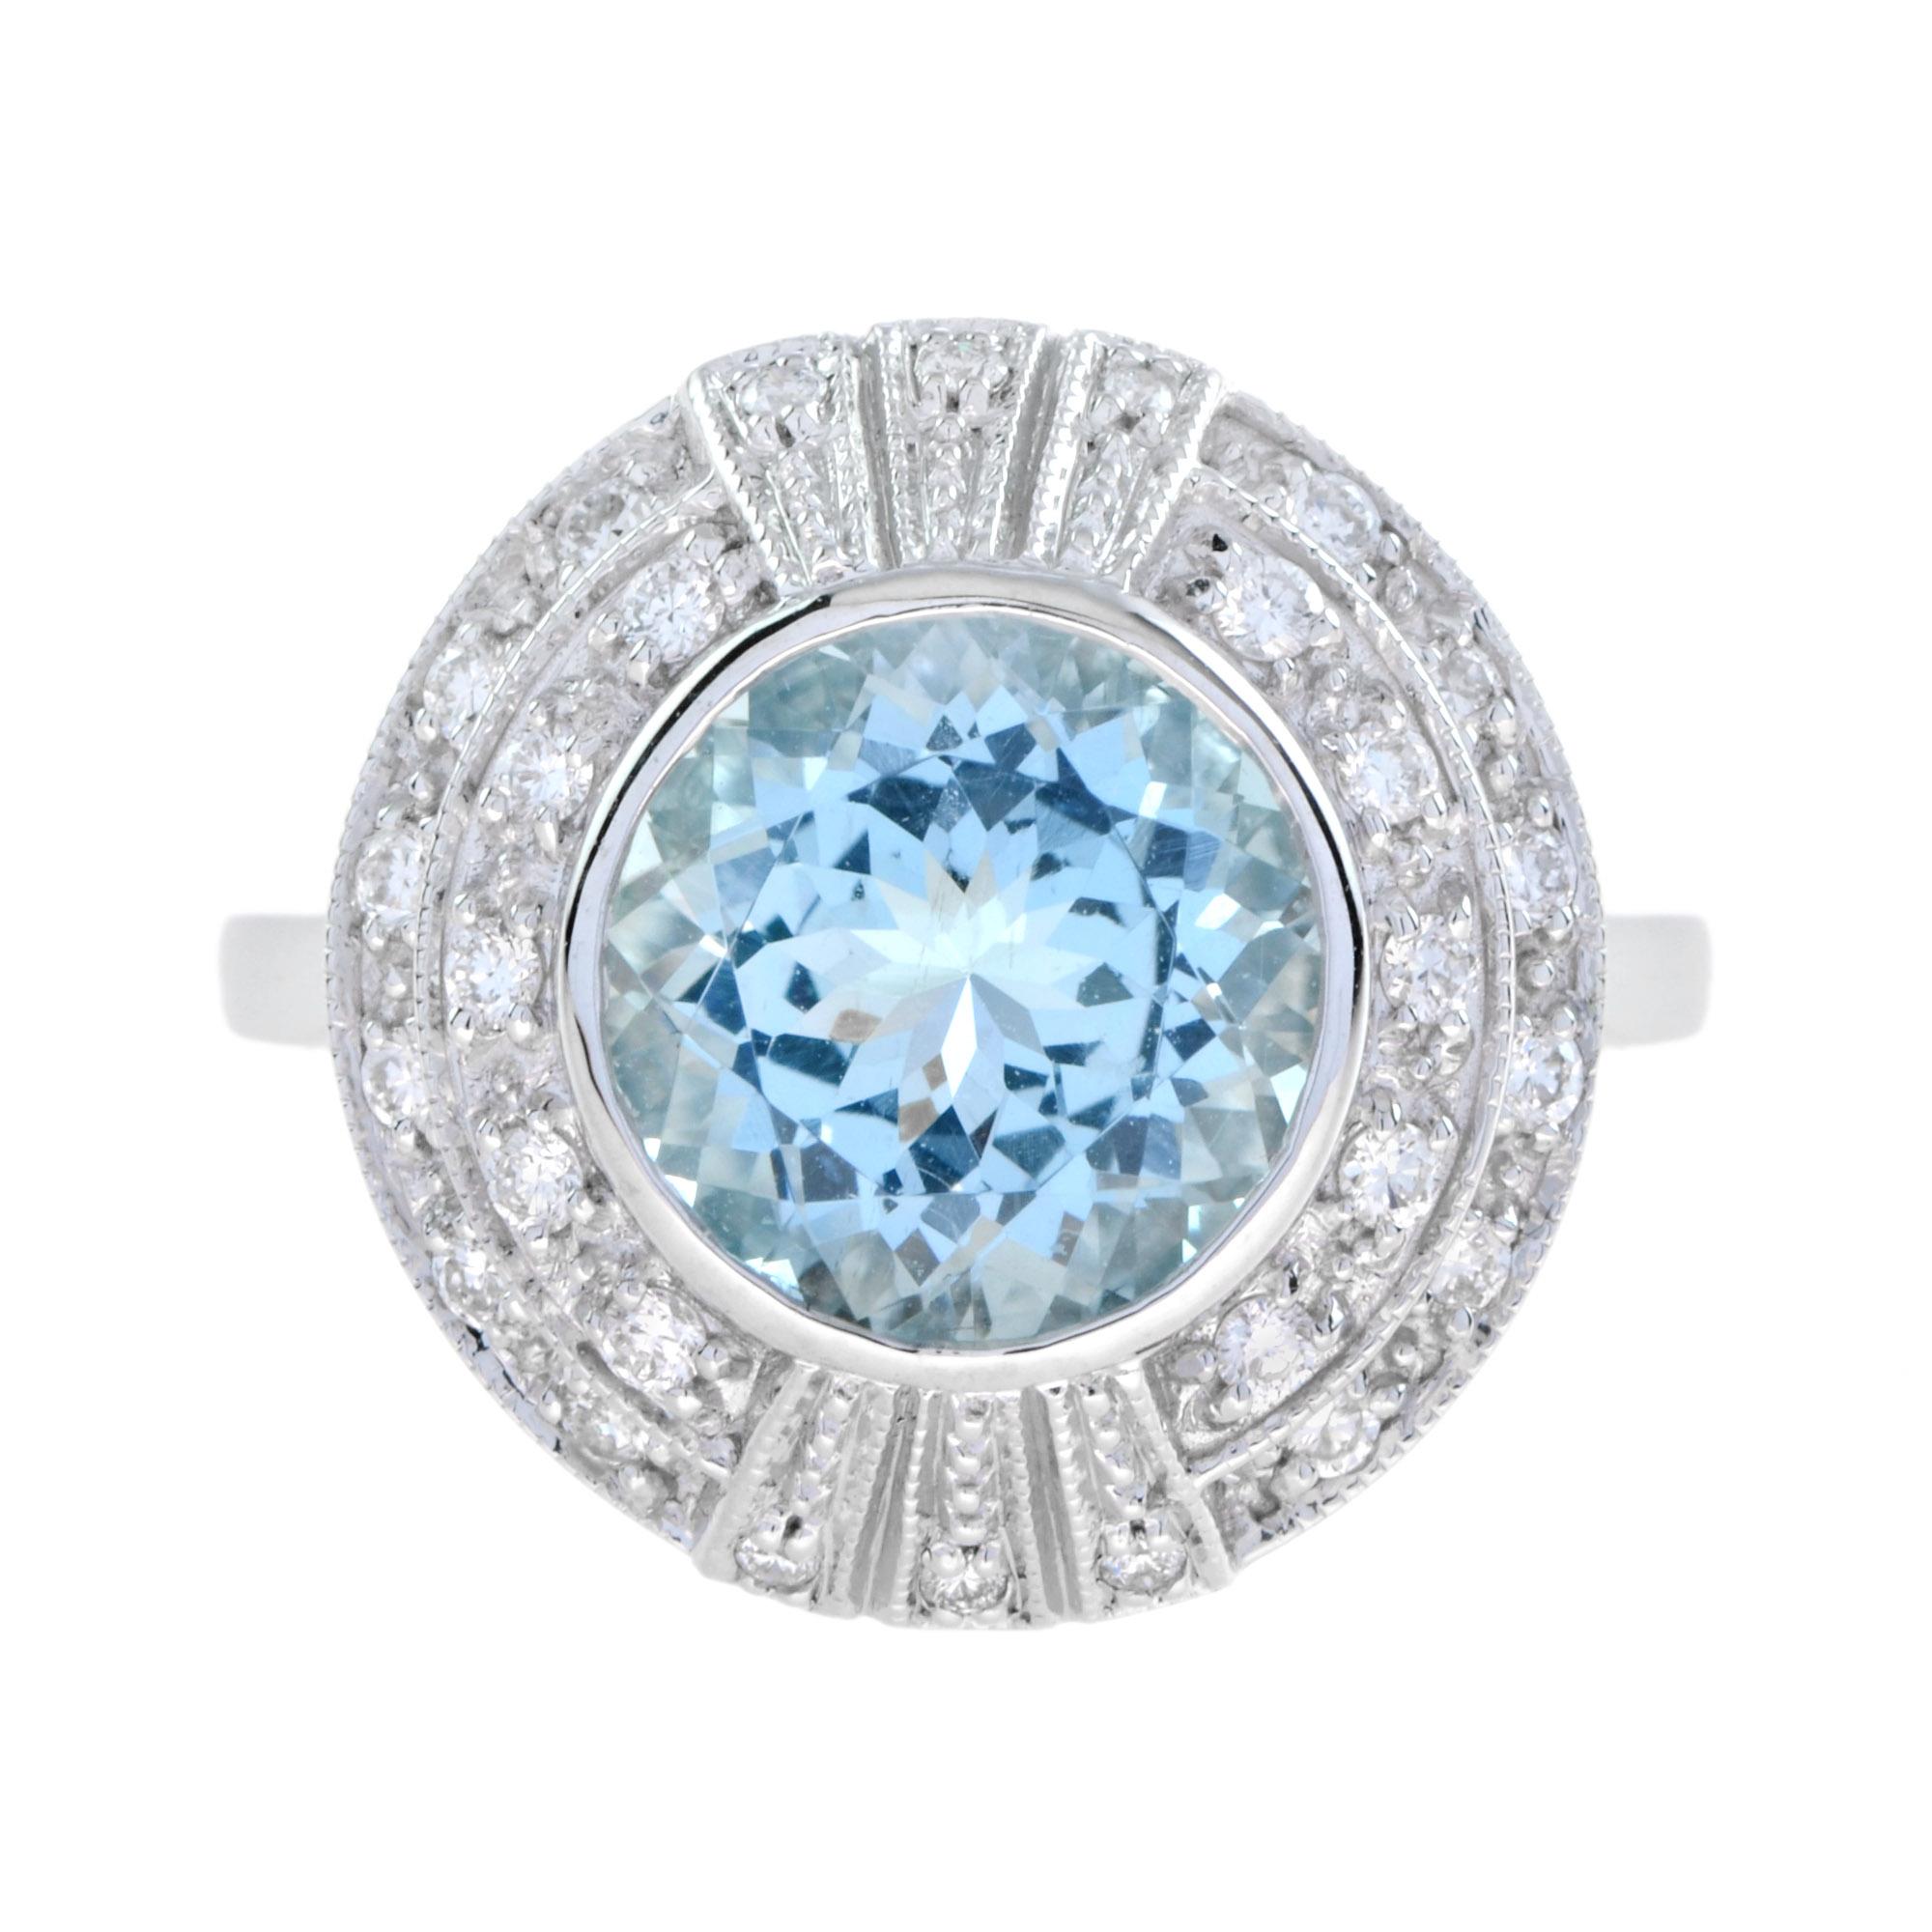 For Sale:  Extraordinary 2.2 Carats Aquamarine and Diamond Halo Ring in 18K White Gold 2